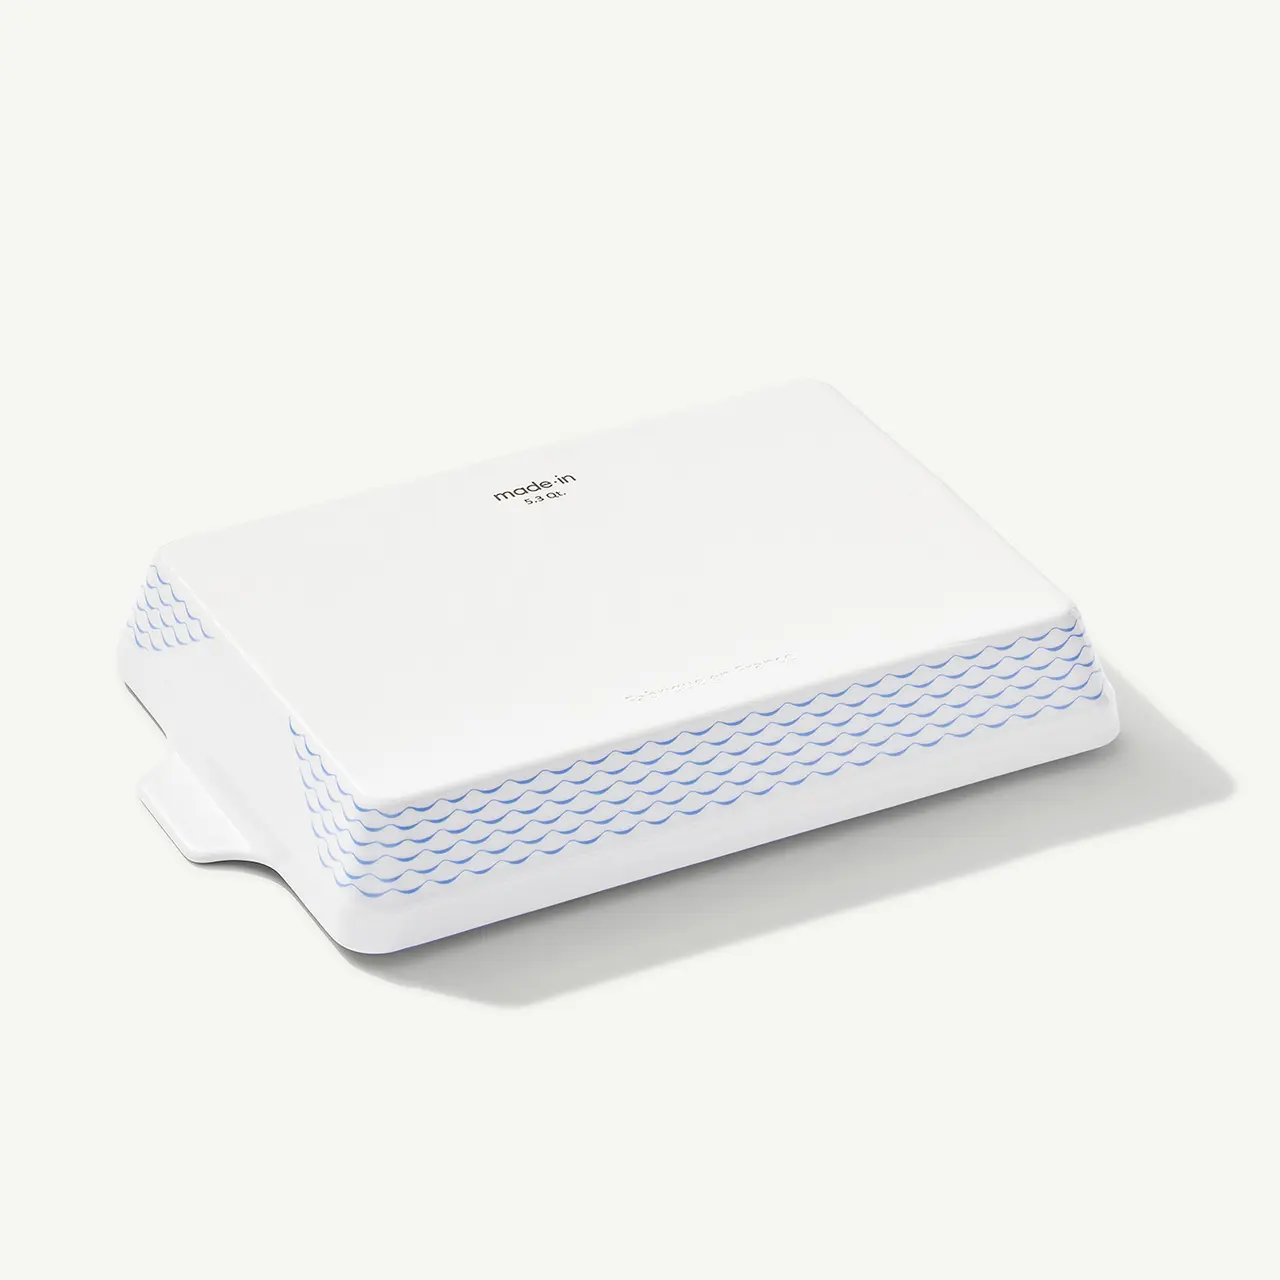 A white wireless router with a textured design on the front edge is displayed on a plain background.